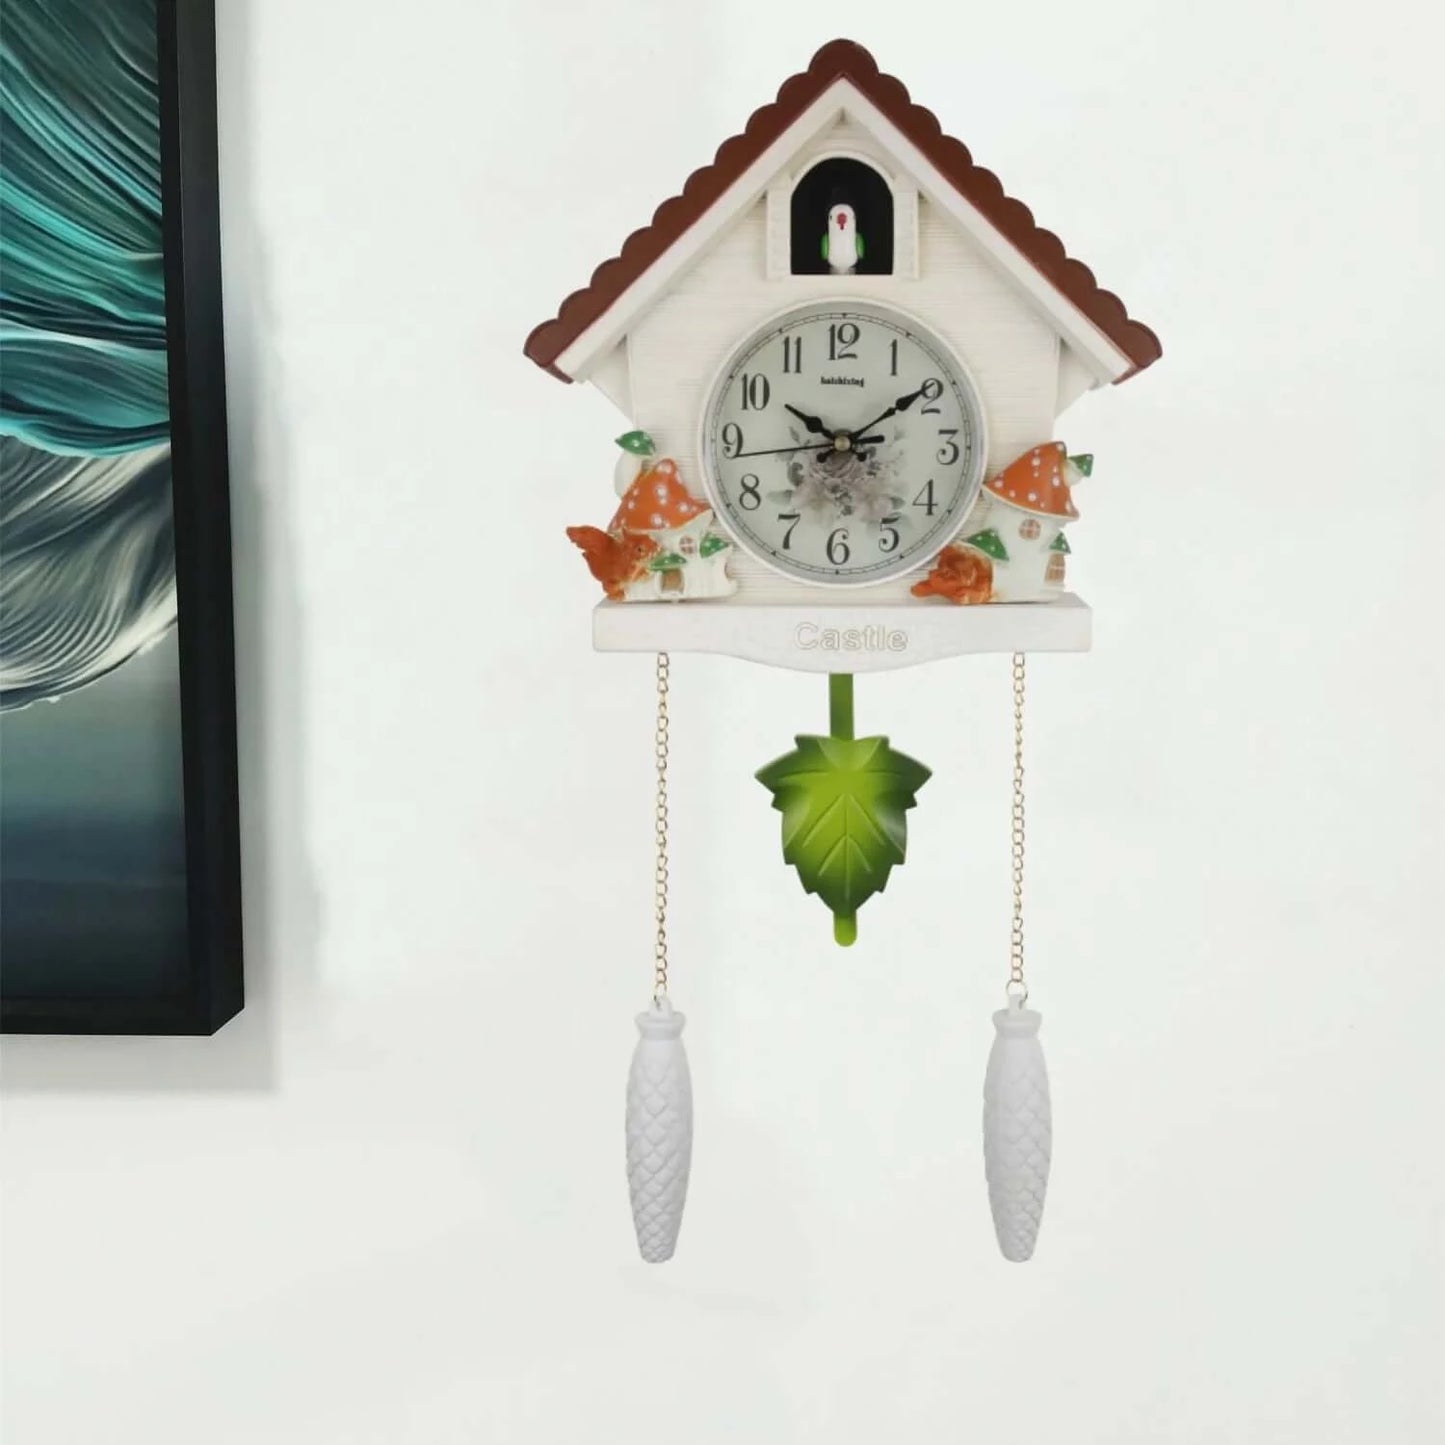 Enchanting Cuckoo Clock with Squirrels - A Touch of Nature in Your Home